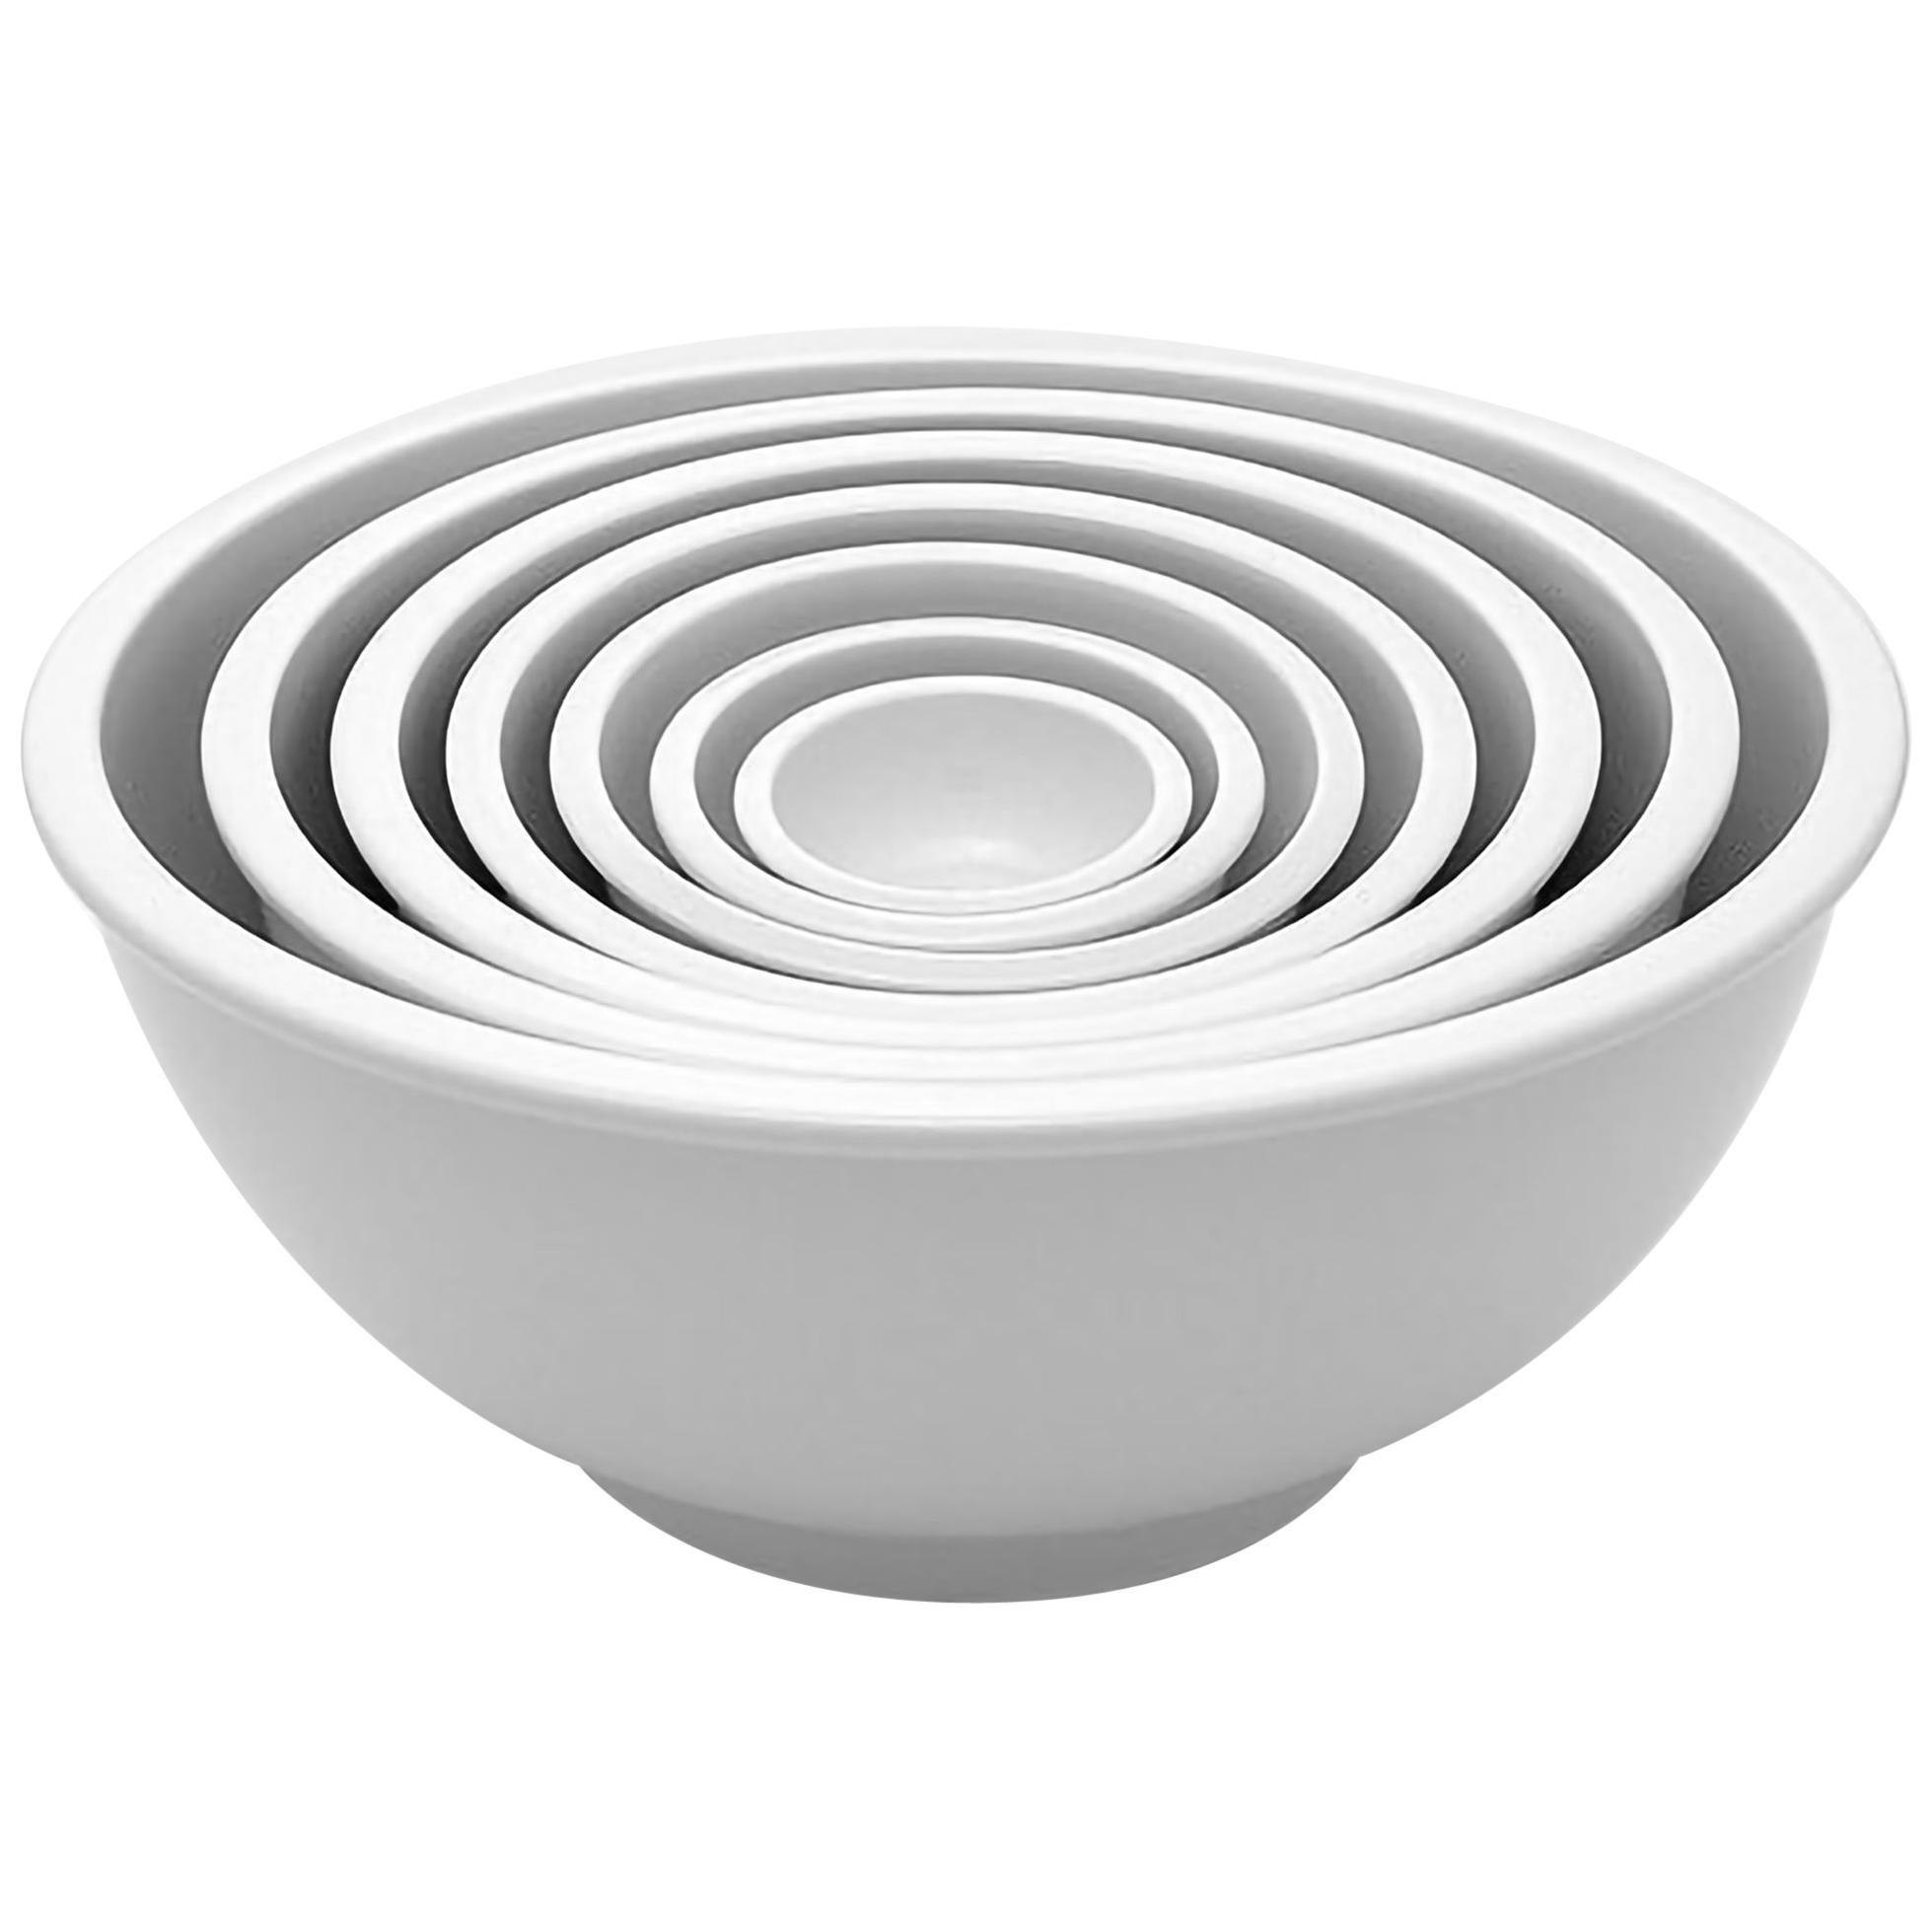 Studio Pieter Stockmans 7 in 1 White Bowls For Sale